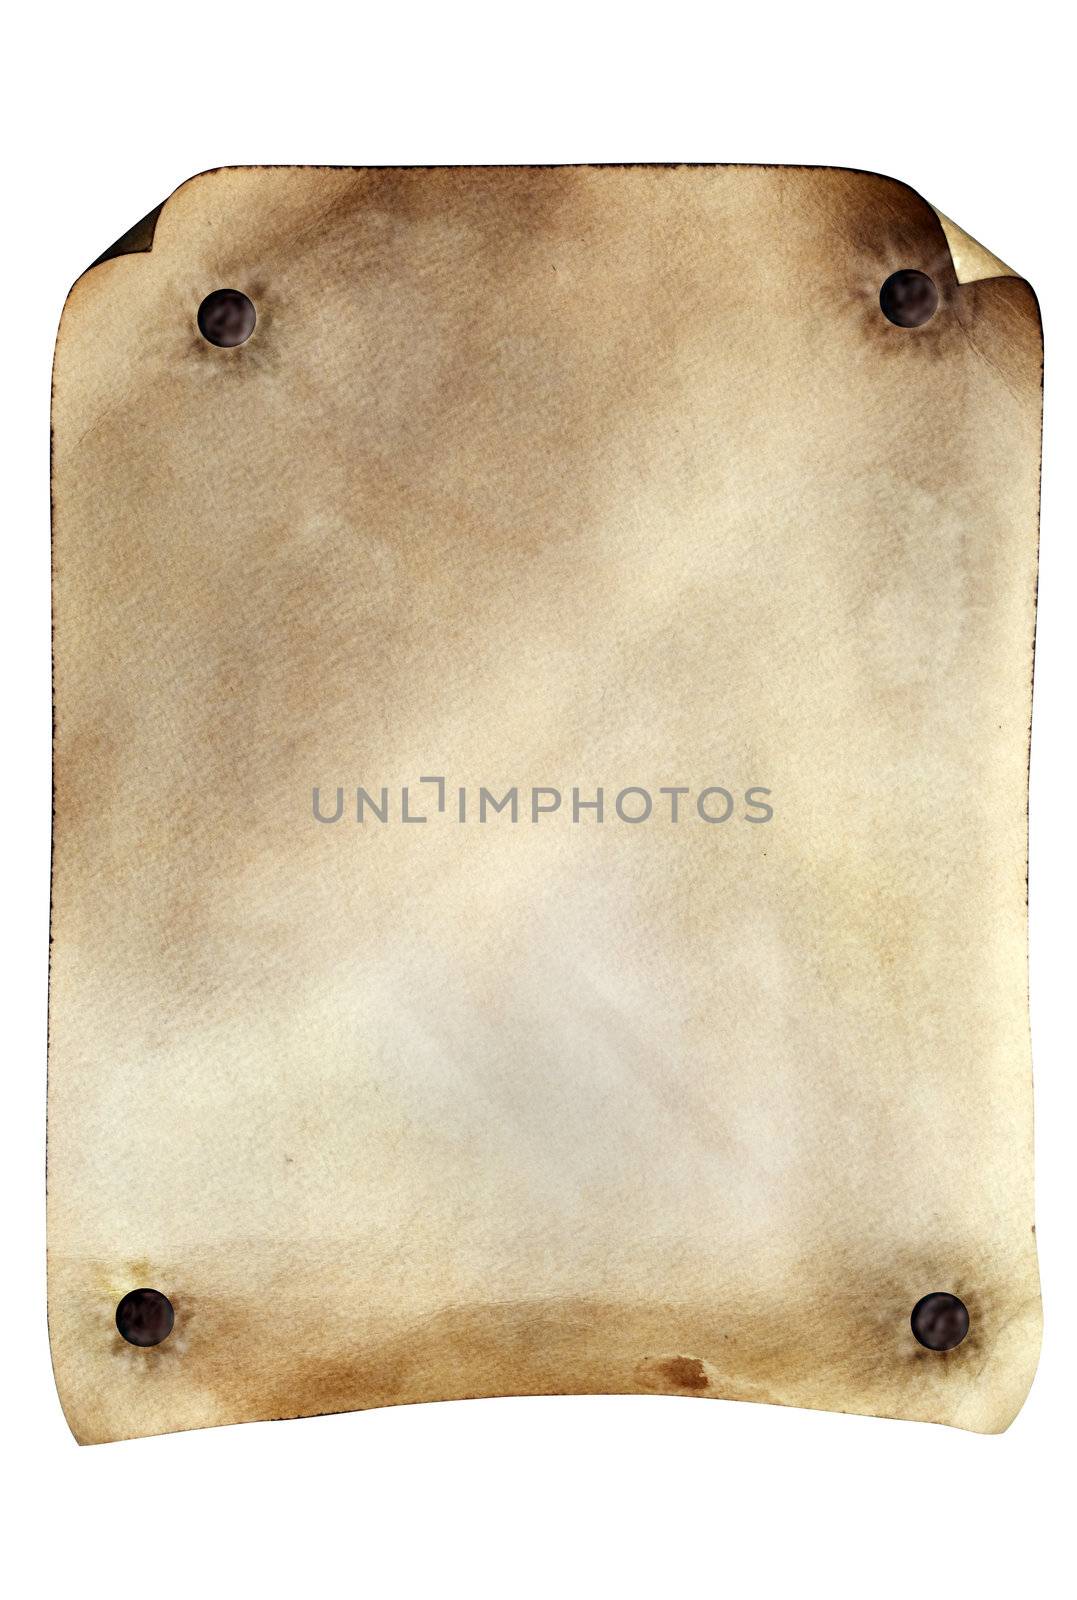 Grunge weathered parchment isolated with a clipping path made to resemble an old wanted poster from the old west.